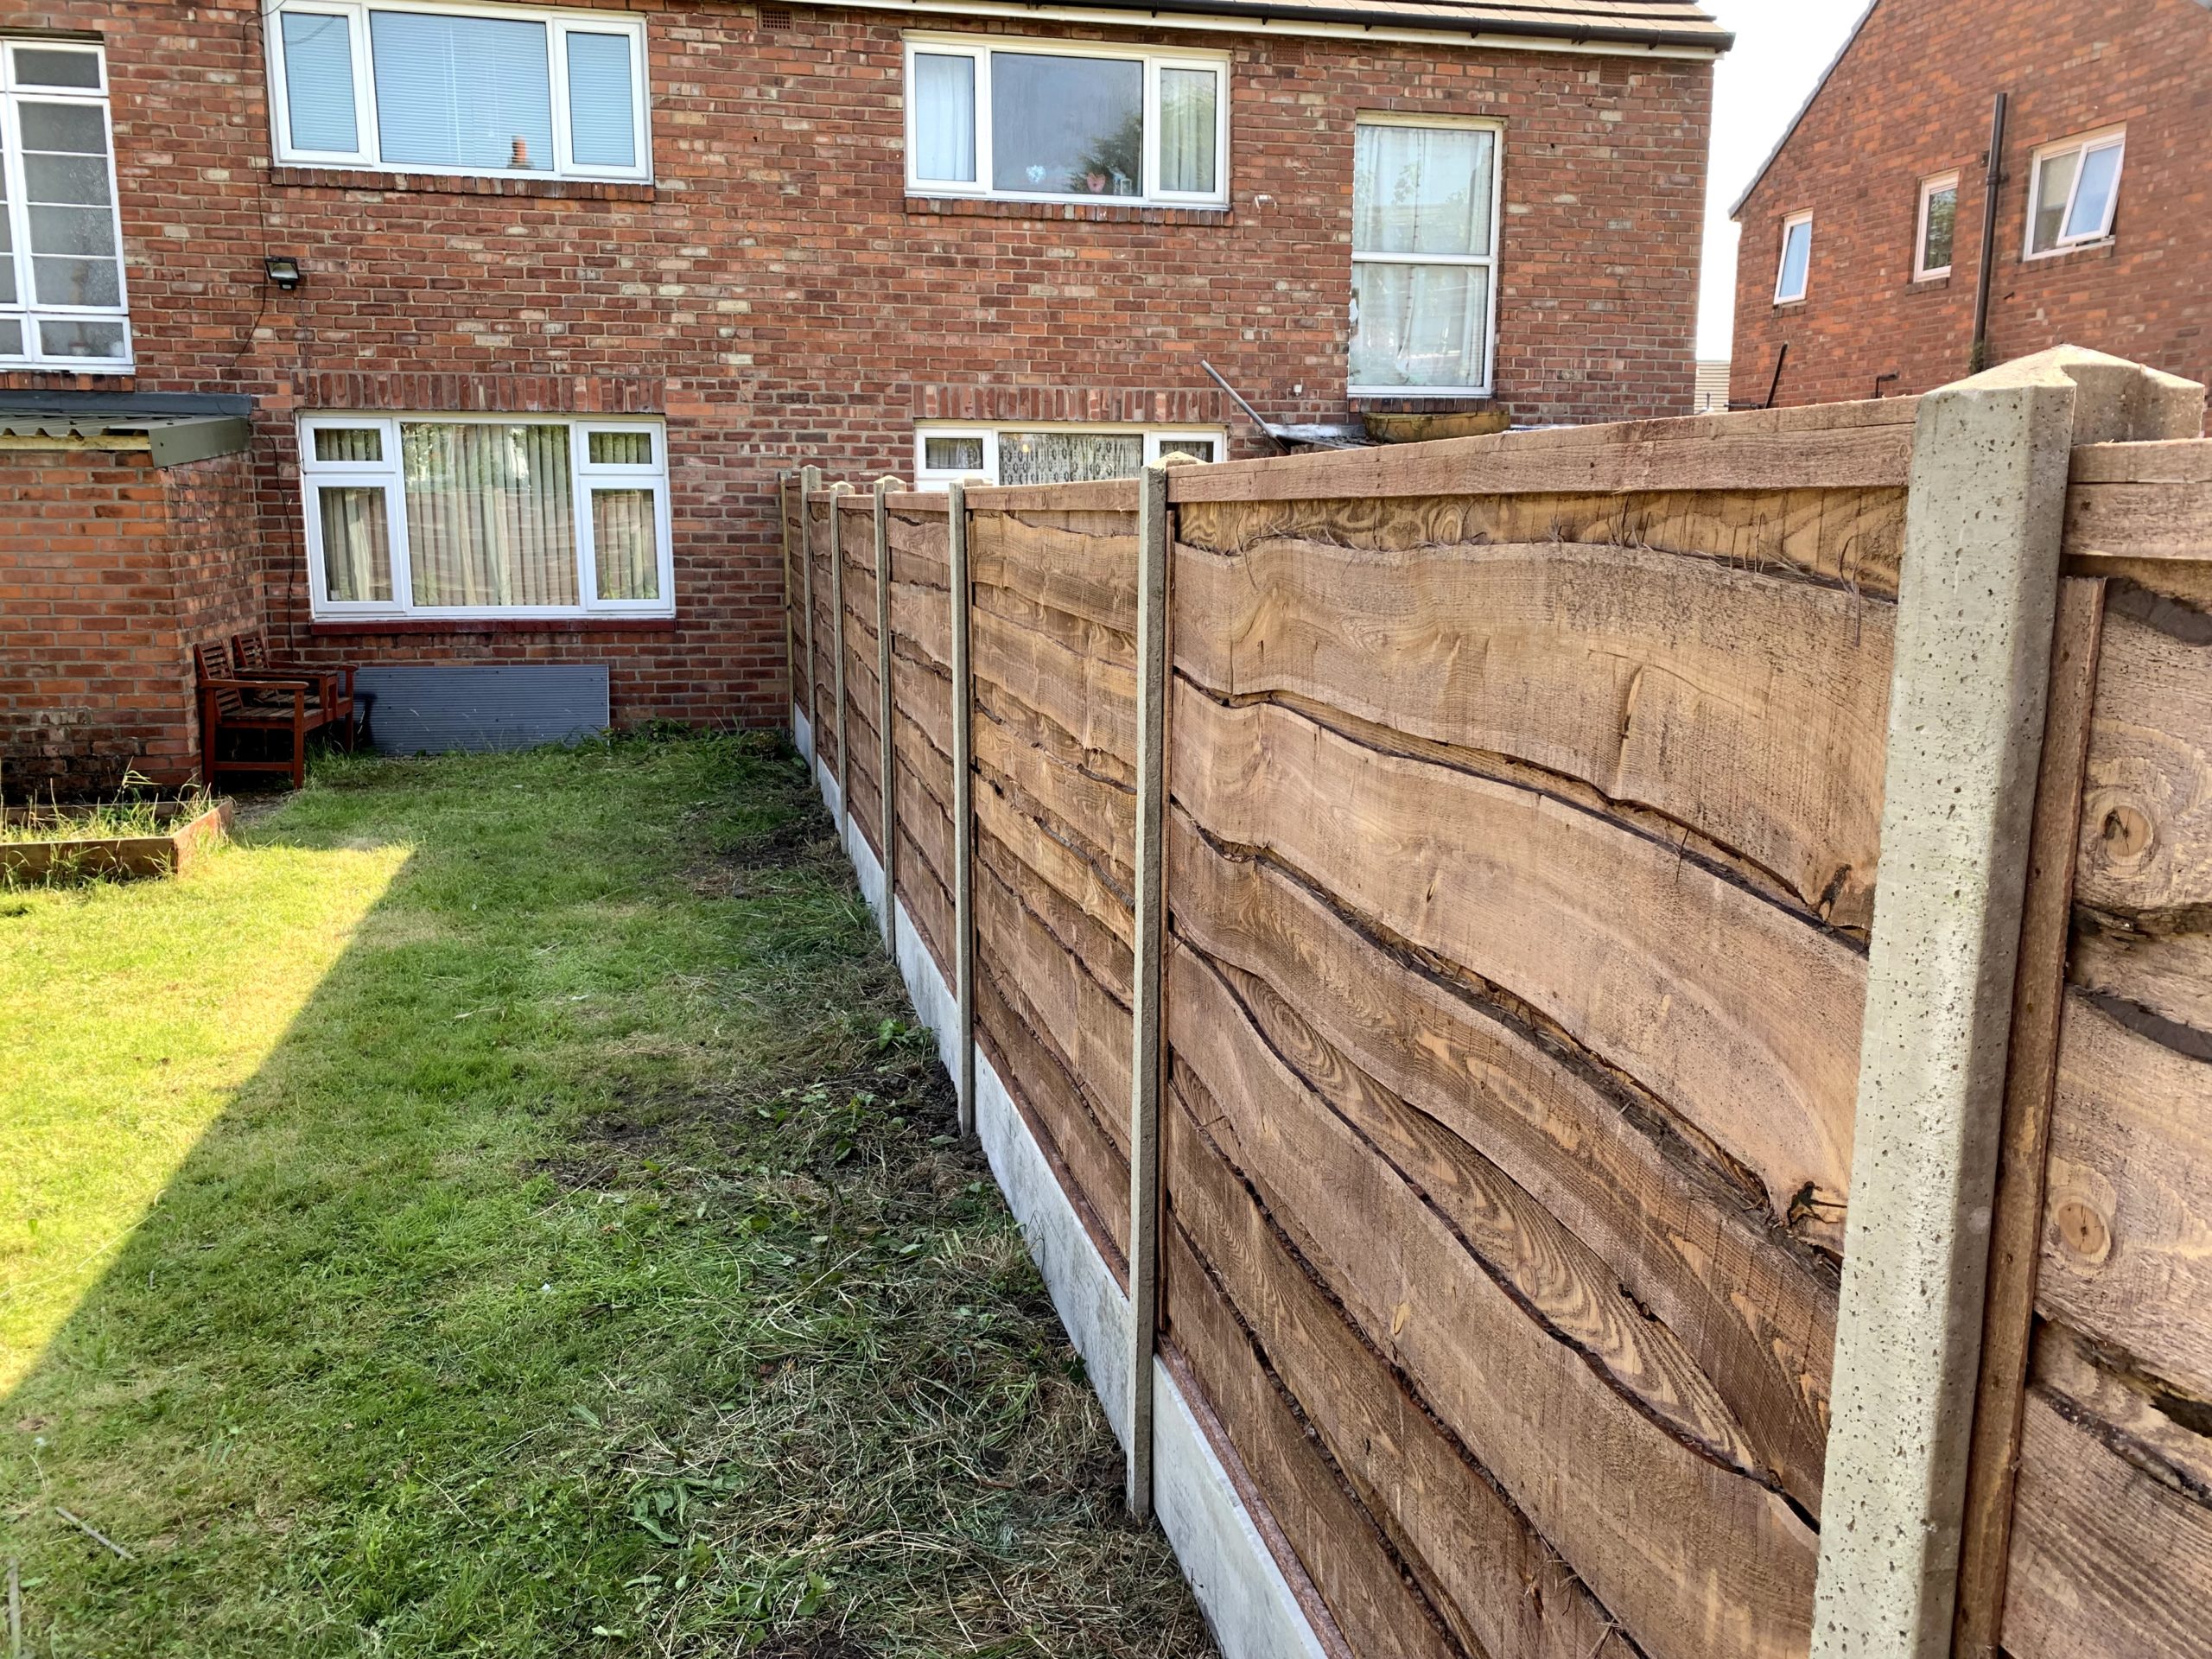 Fencing supplied & installed, This install was completed in 1 day 3